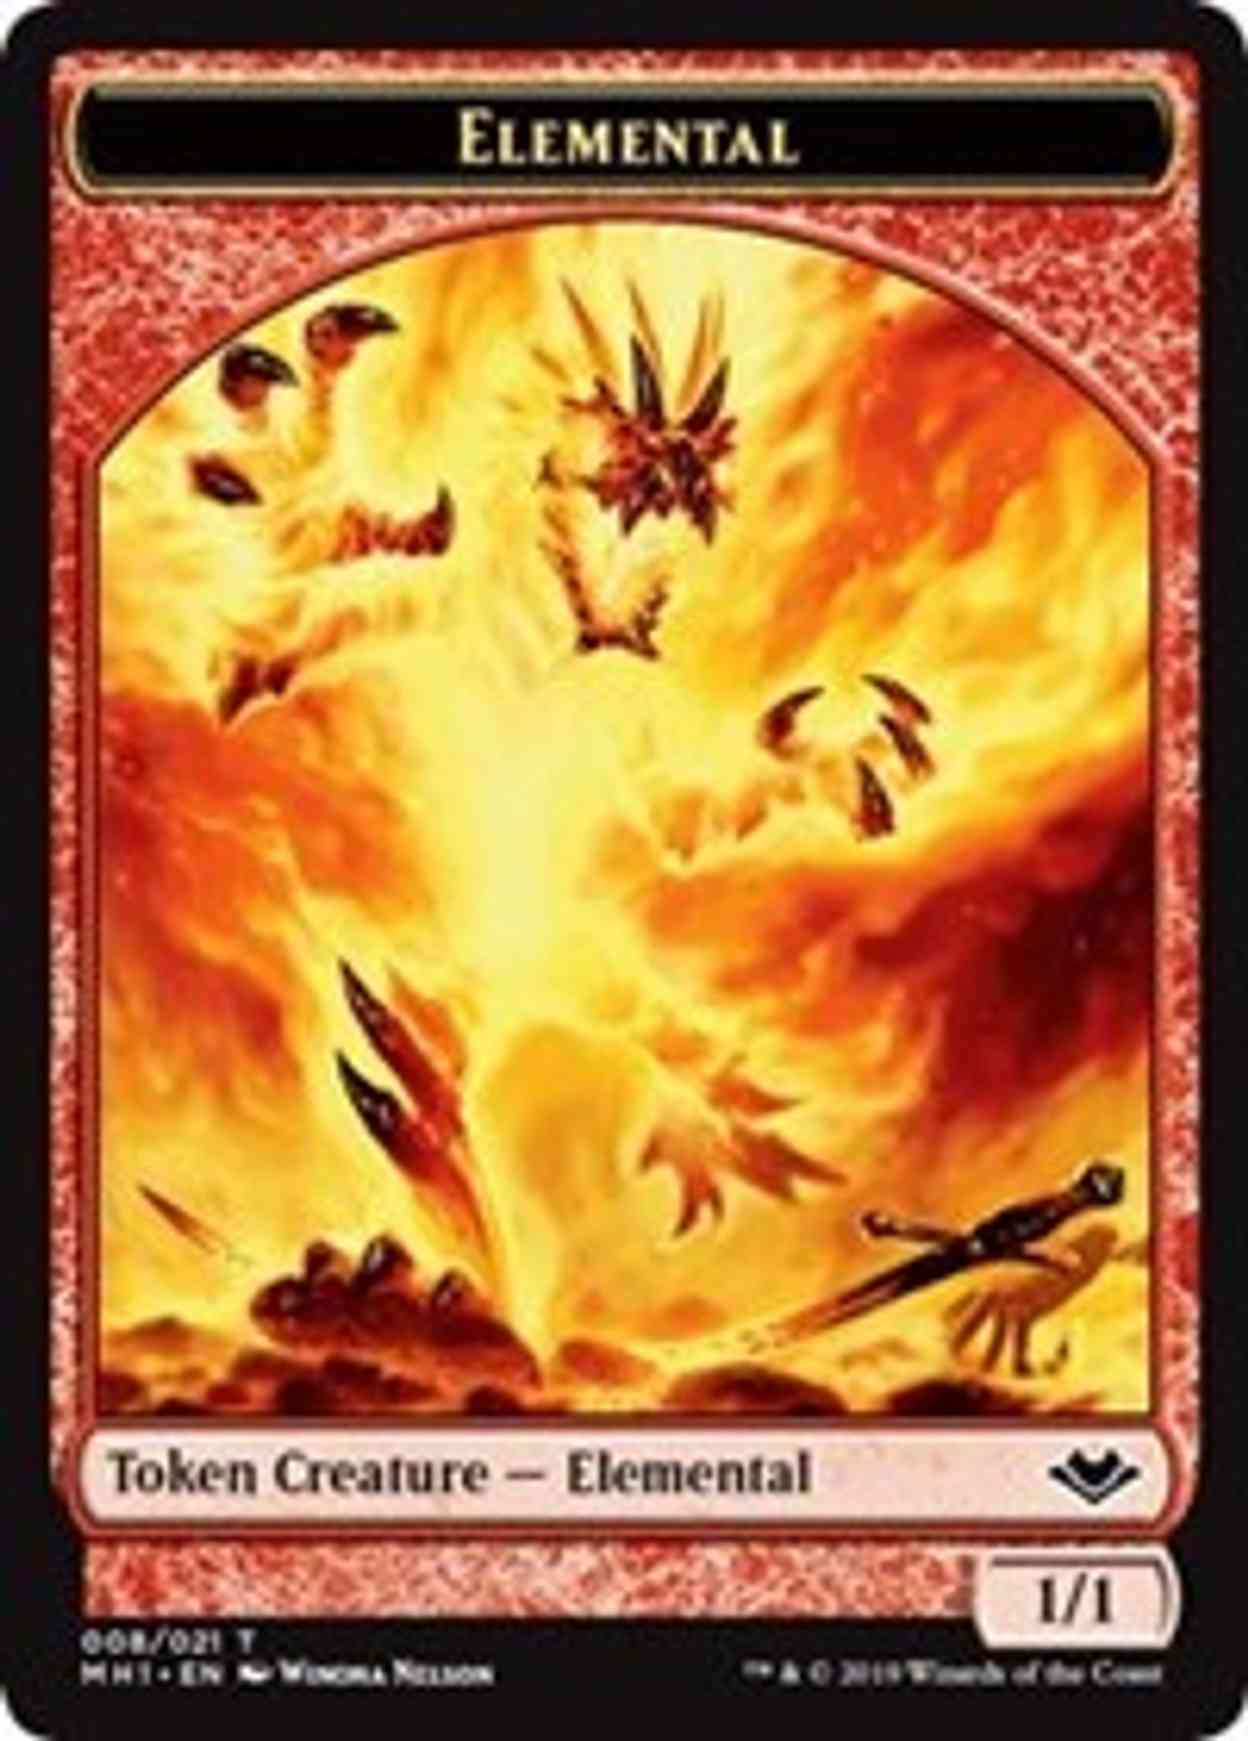 Elemental (008) // Elephant (012) Double-sided Token magic card front